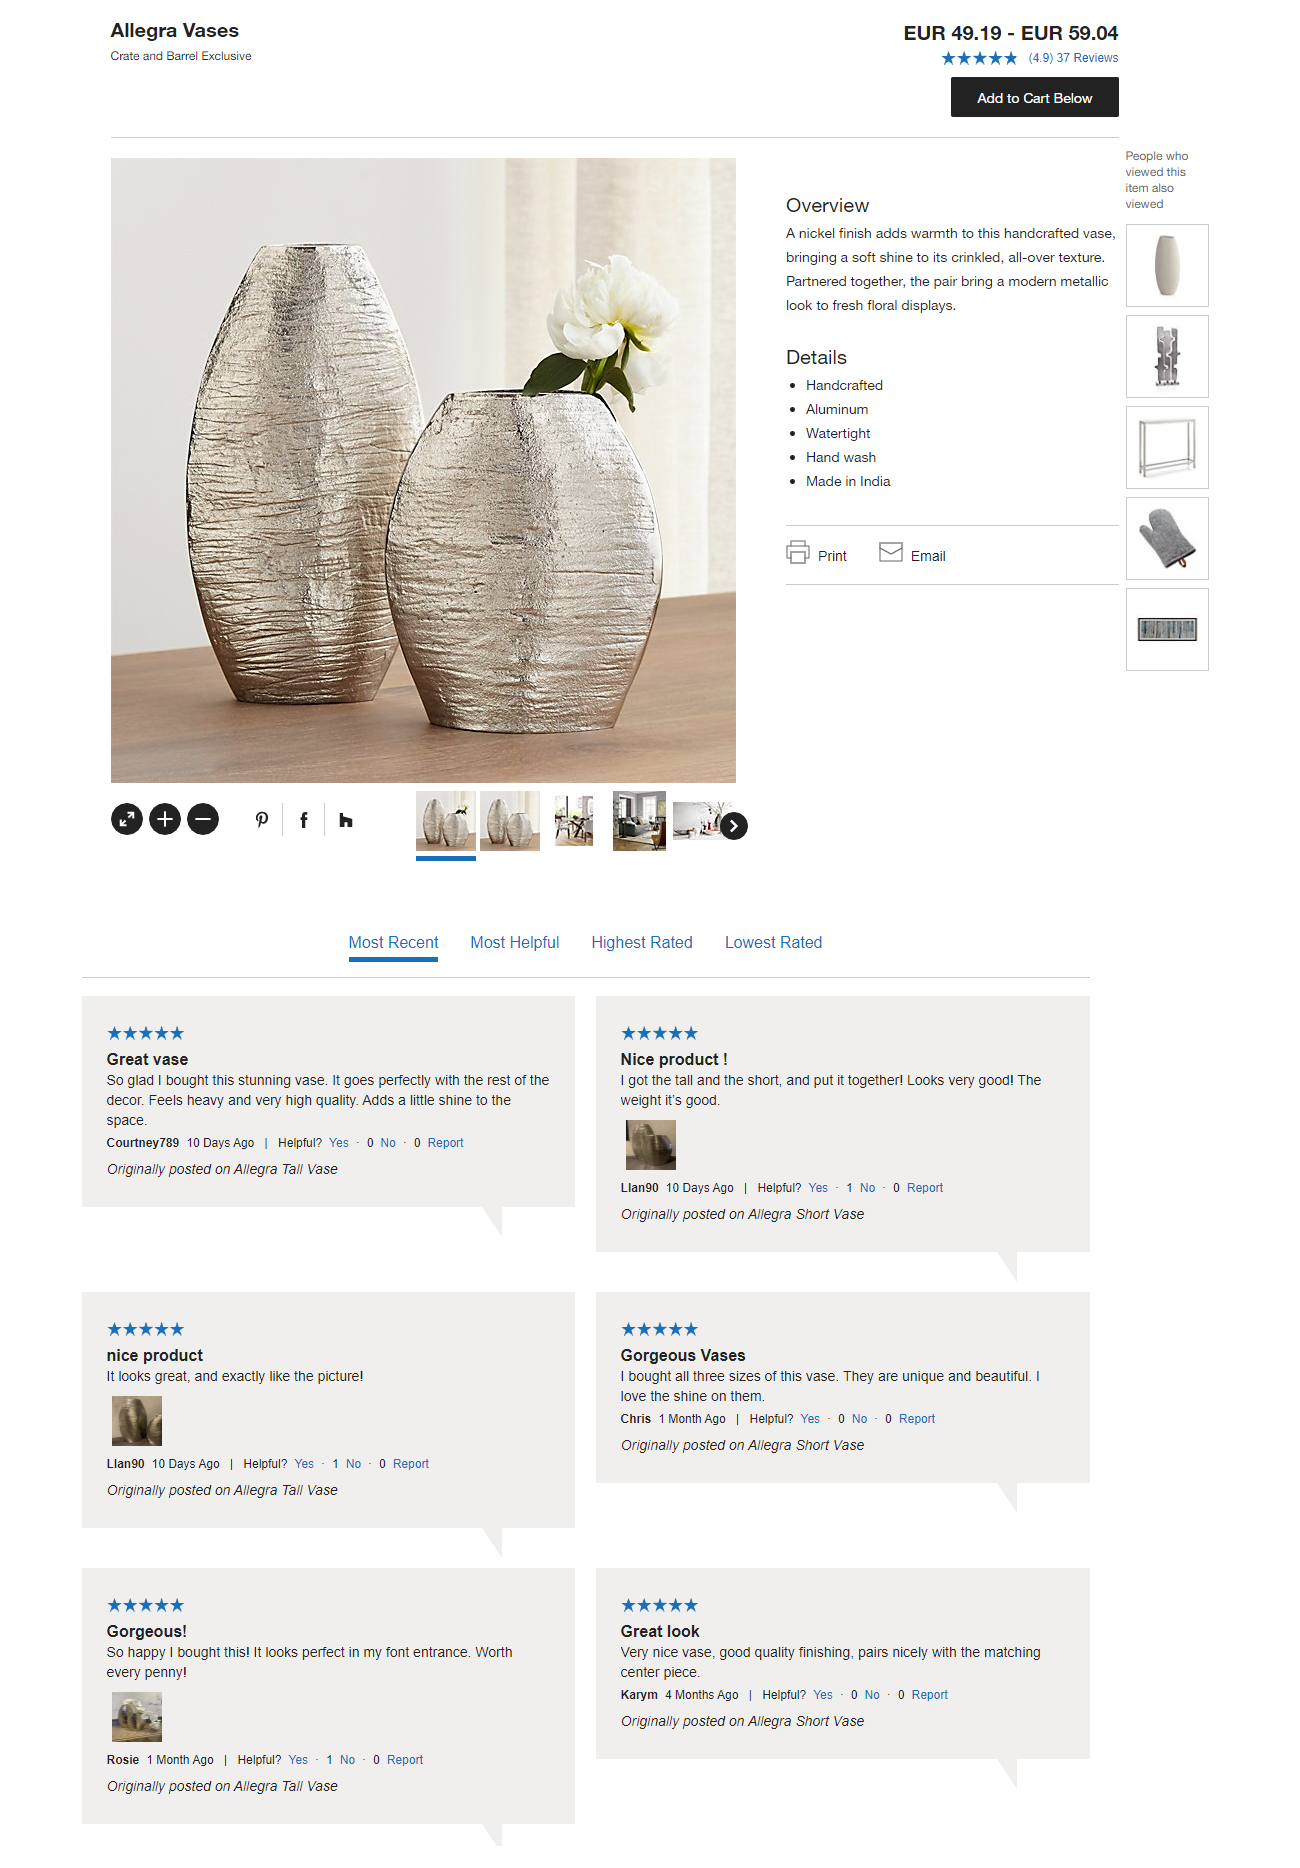 Crate and Barrel product page